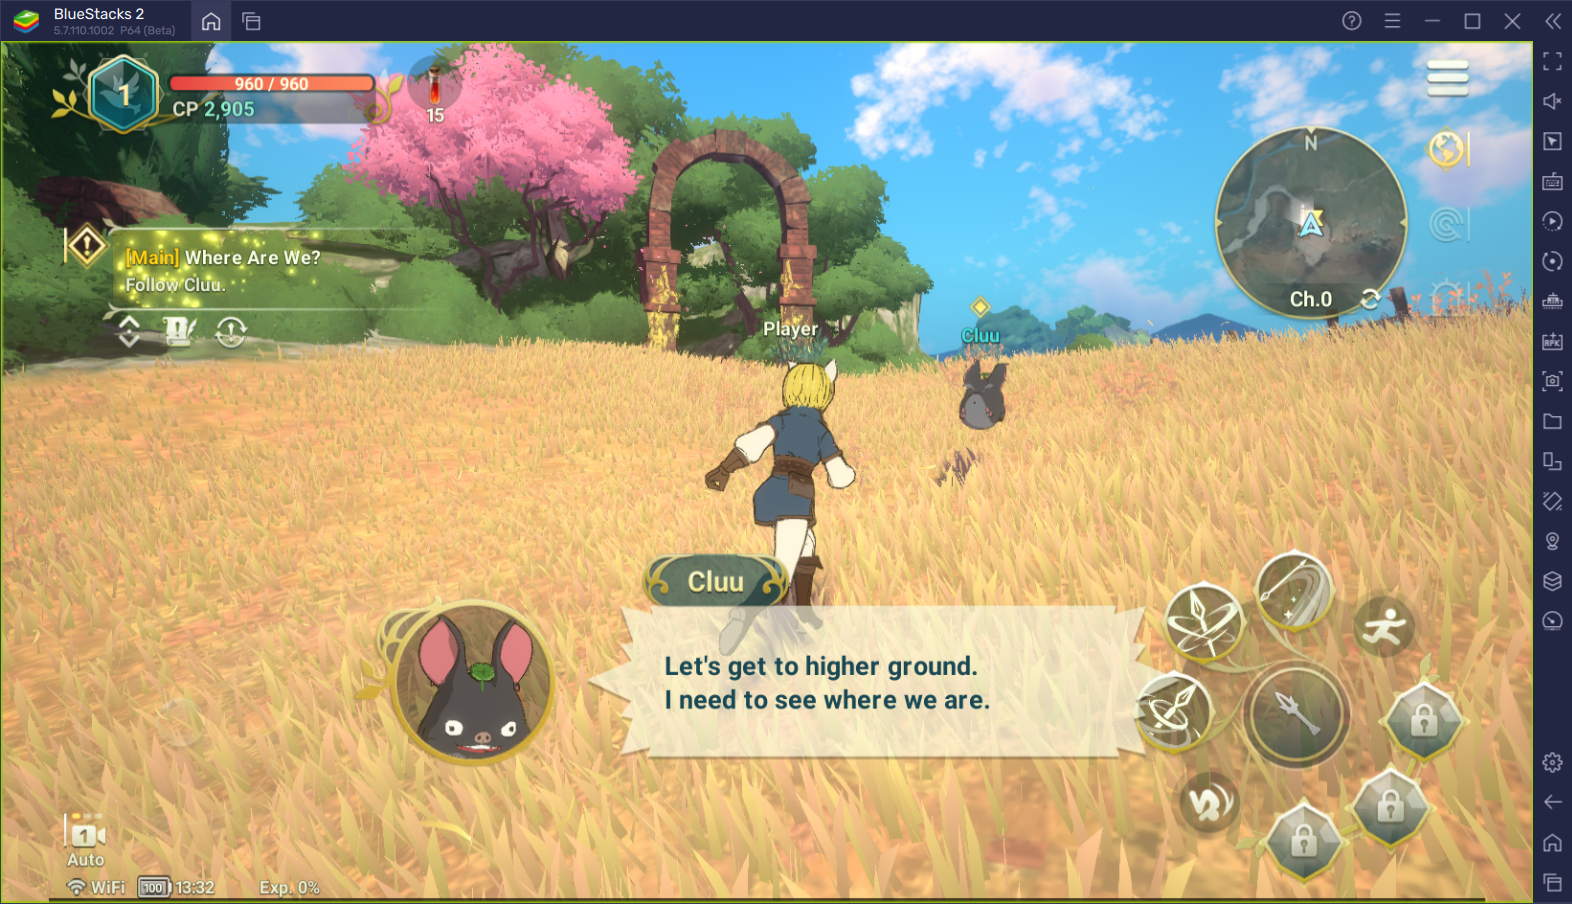 Best Familiars to Choose in Ni no Kuni: Cross Worlds Ranked According to Element